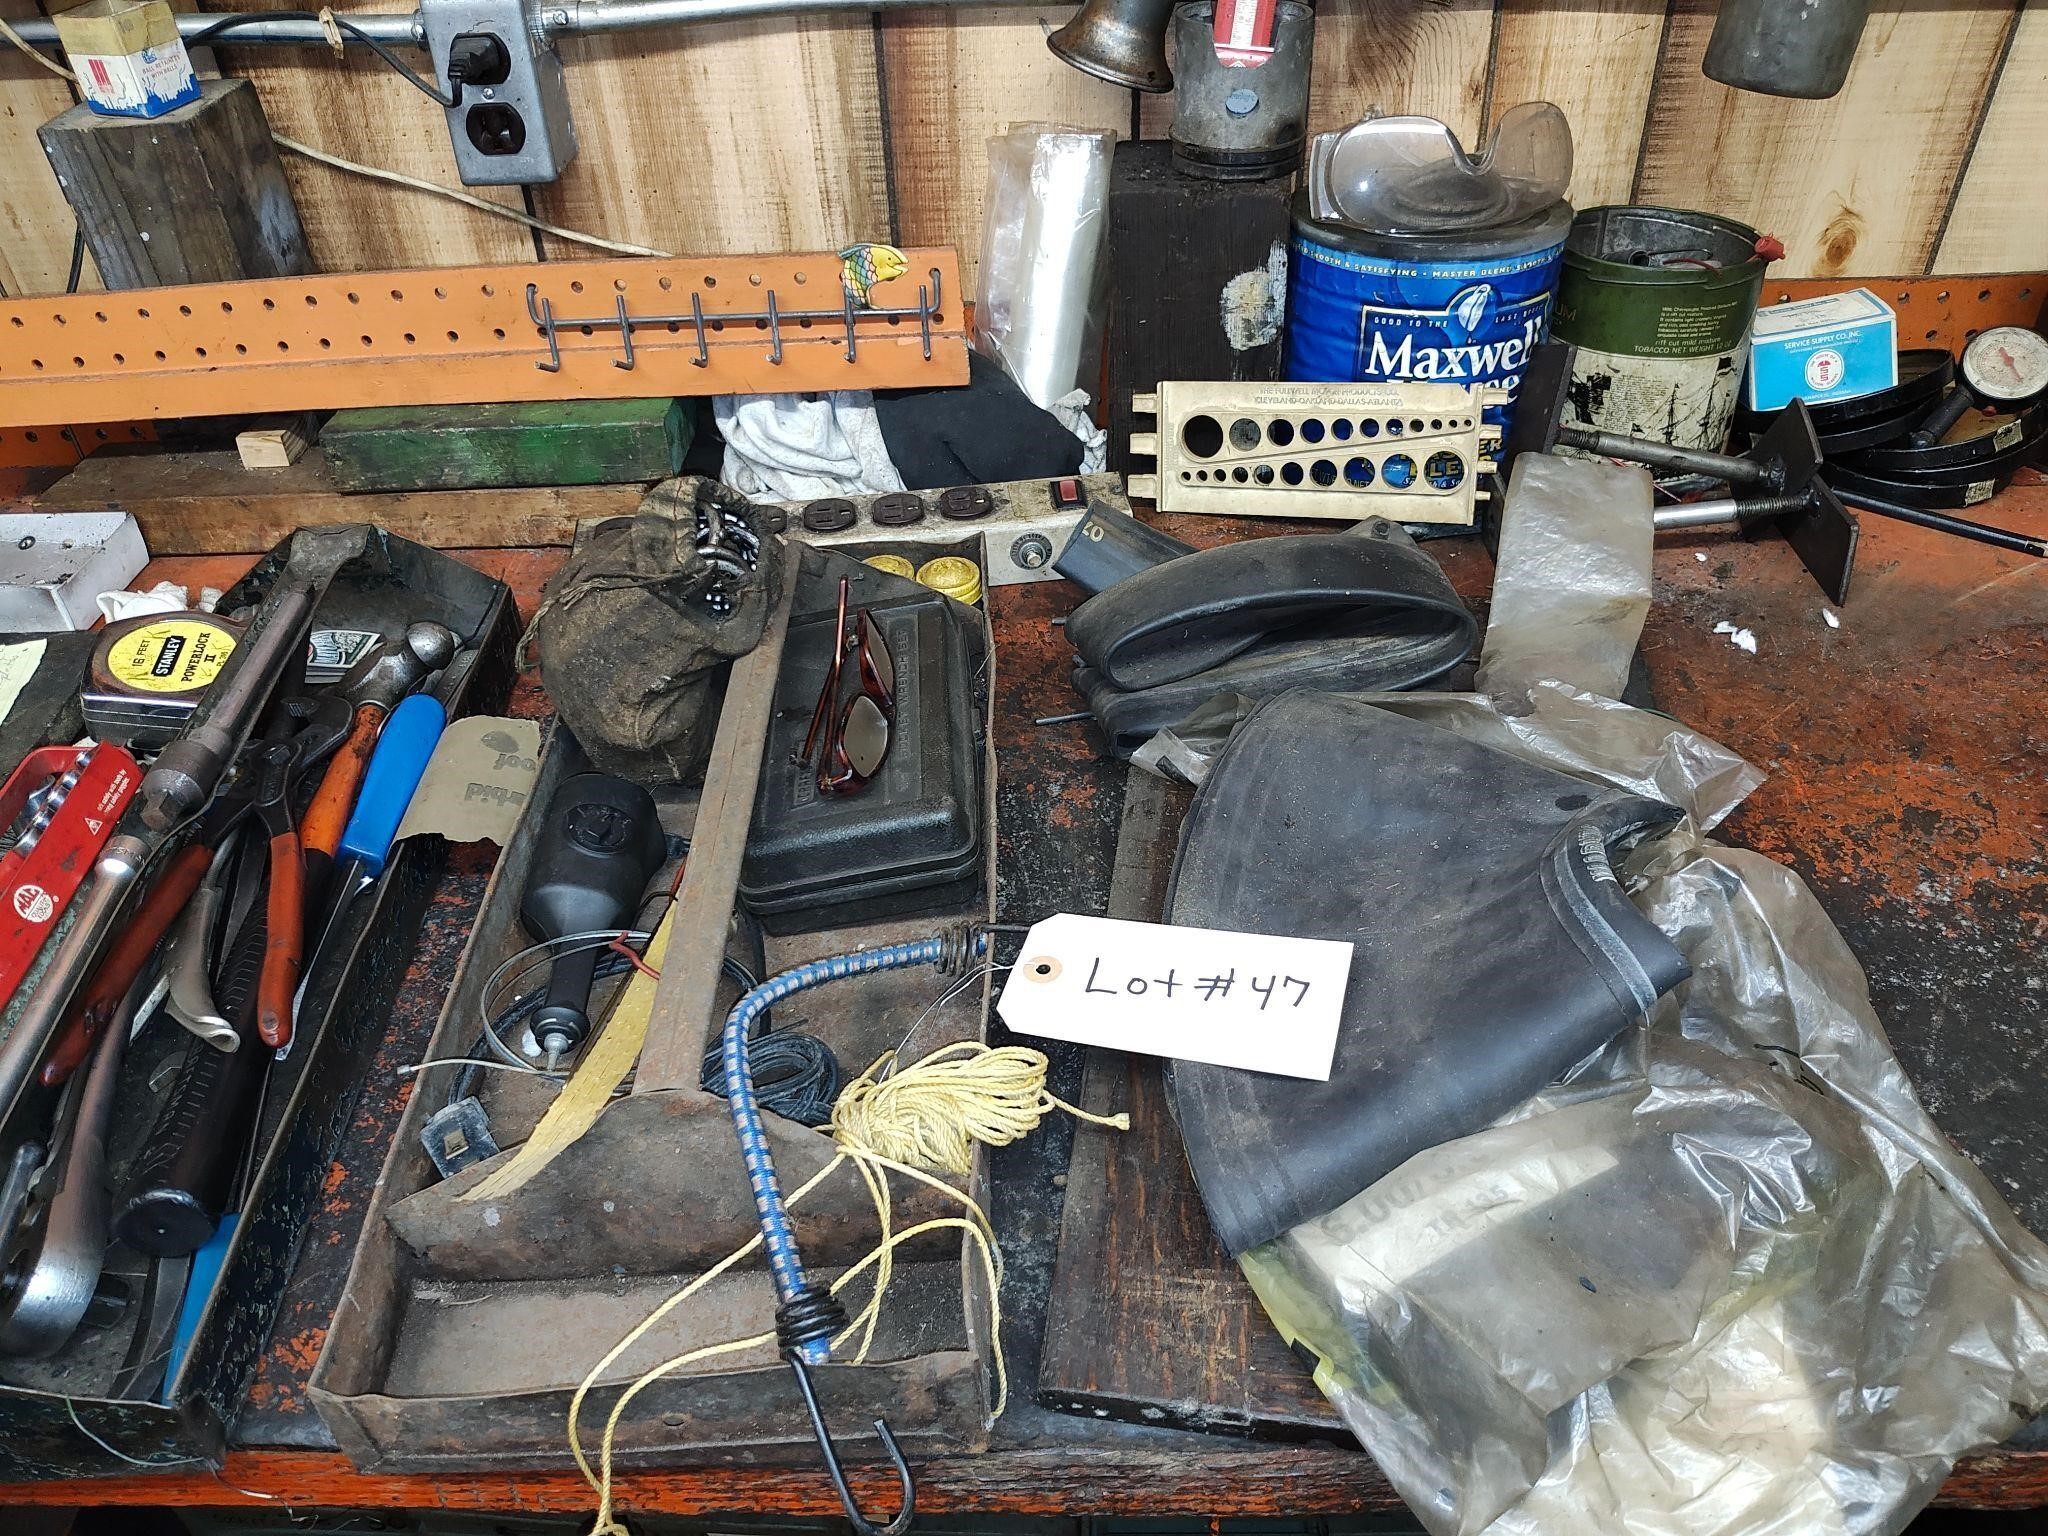 Workbench and all contents on bench only.